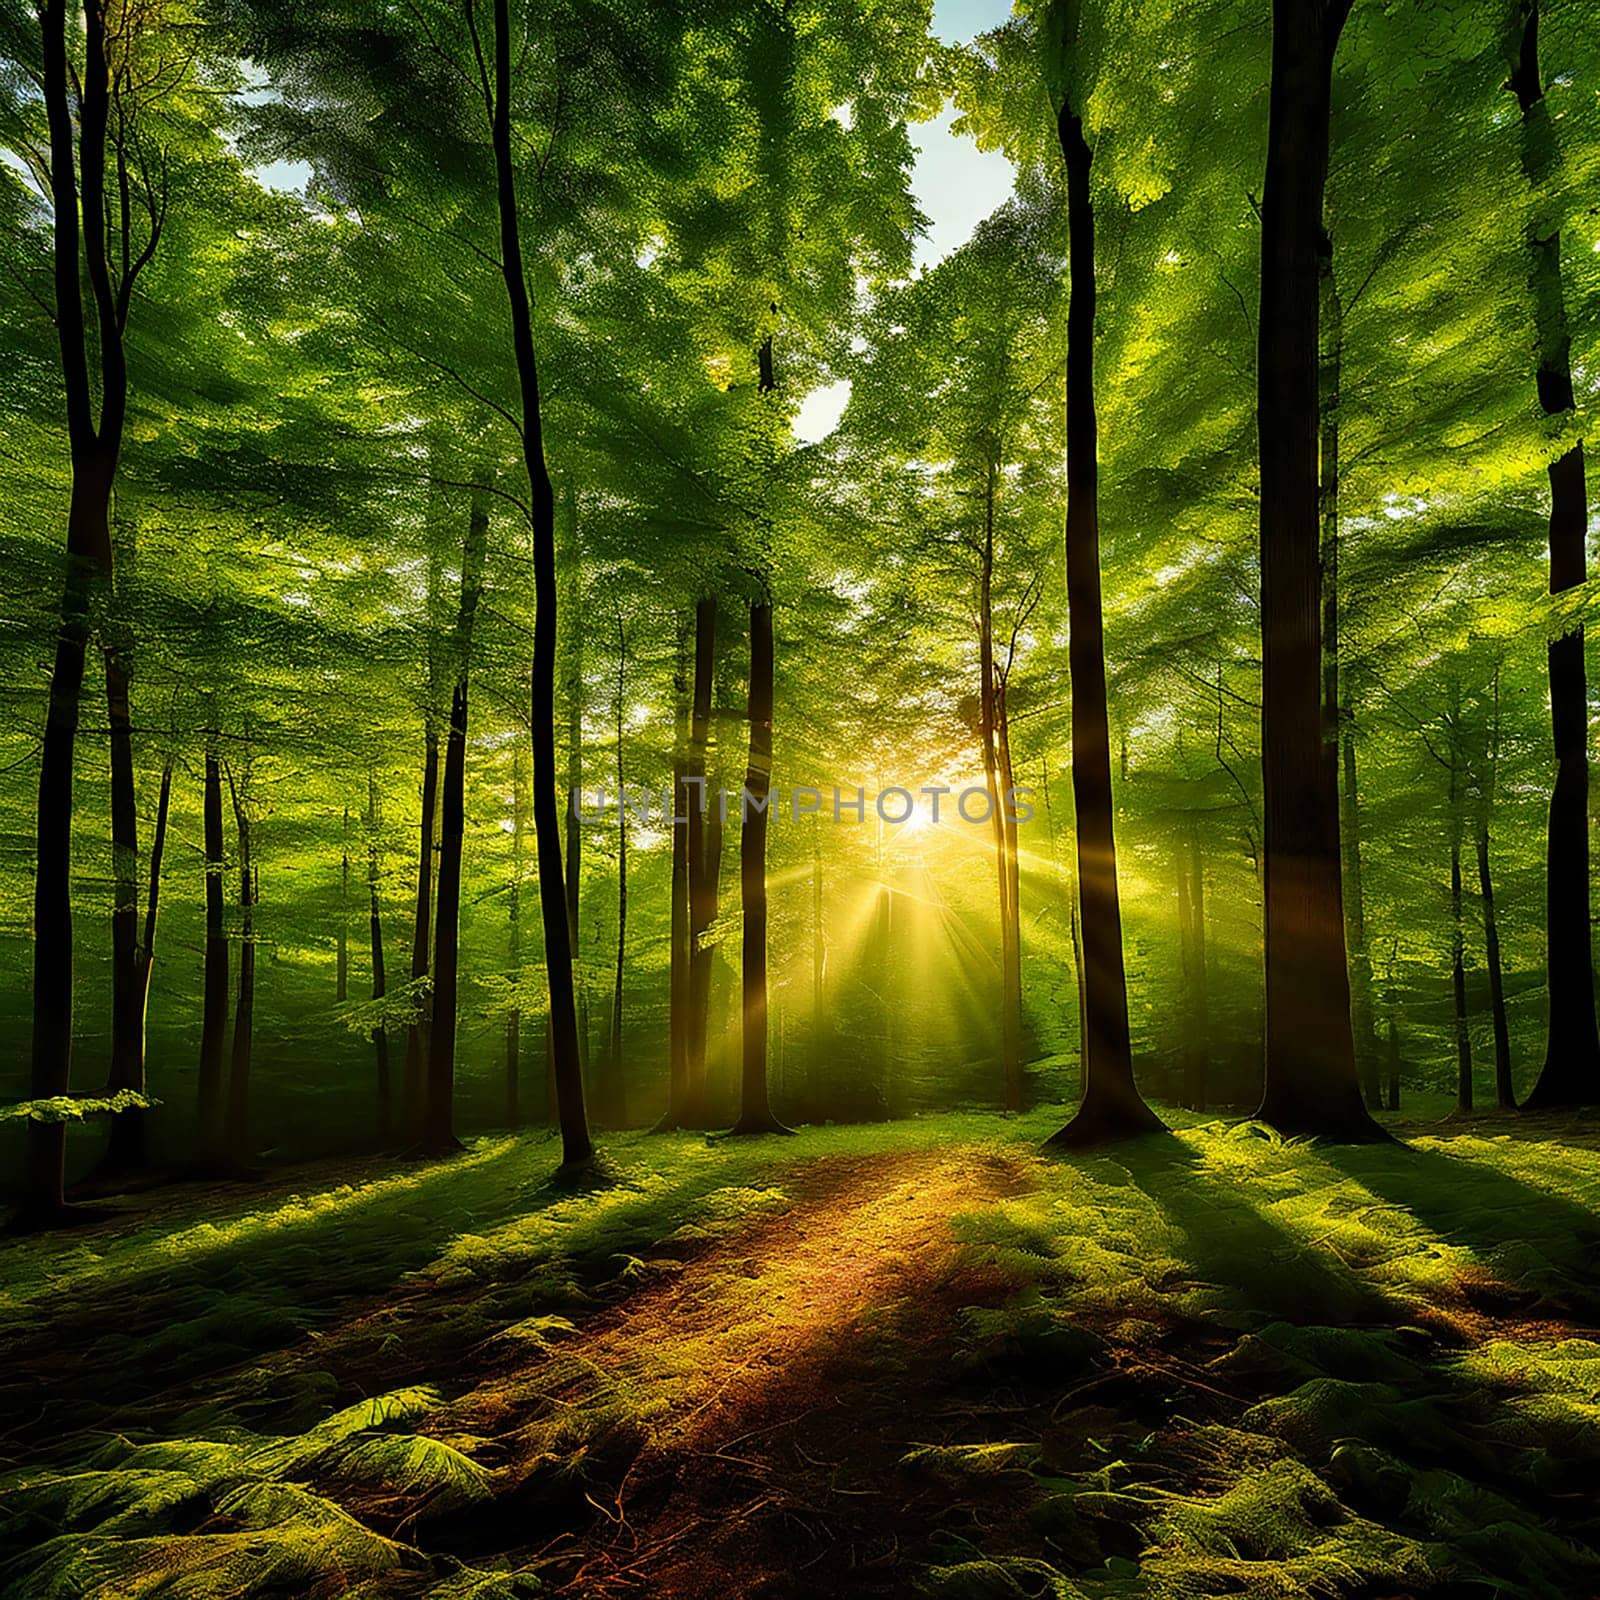 Sunlit Serenity: Panoramic View of a Forest Bathed in Sunlight by Petrichor